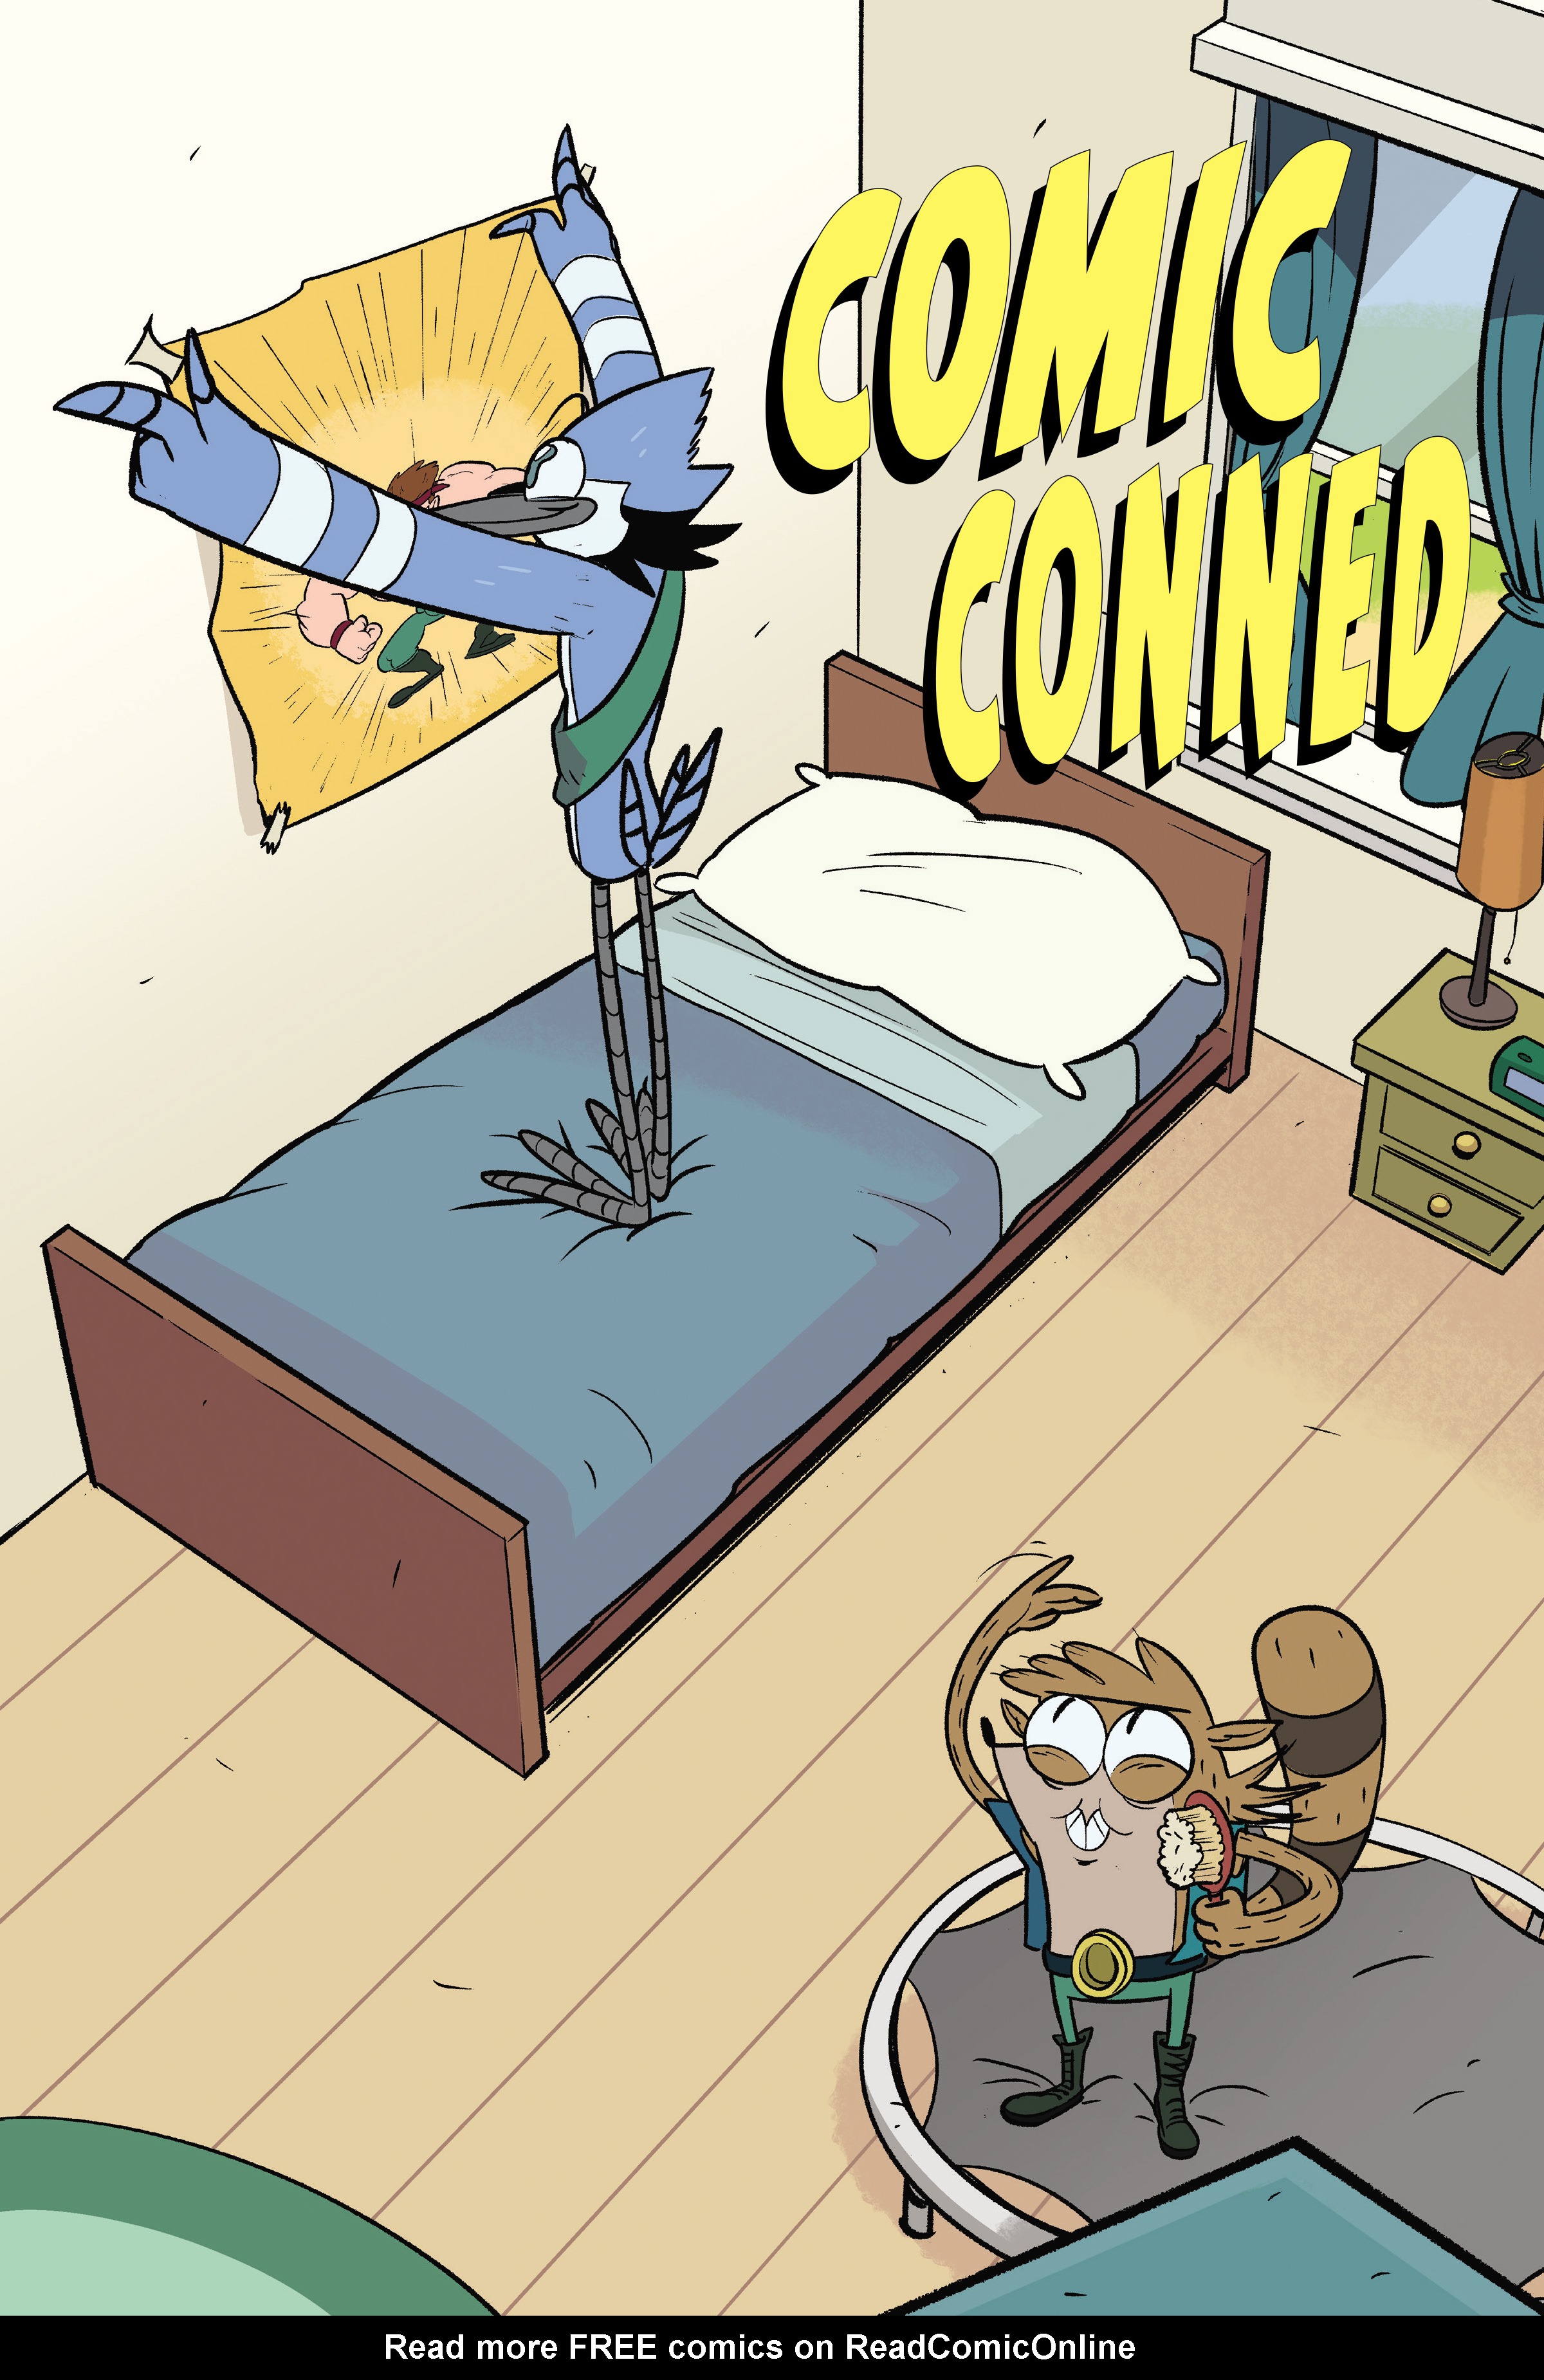 Read online Regular Show: Comic Conned comic -  Issue # TPB - 7